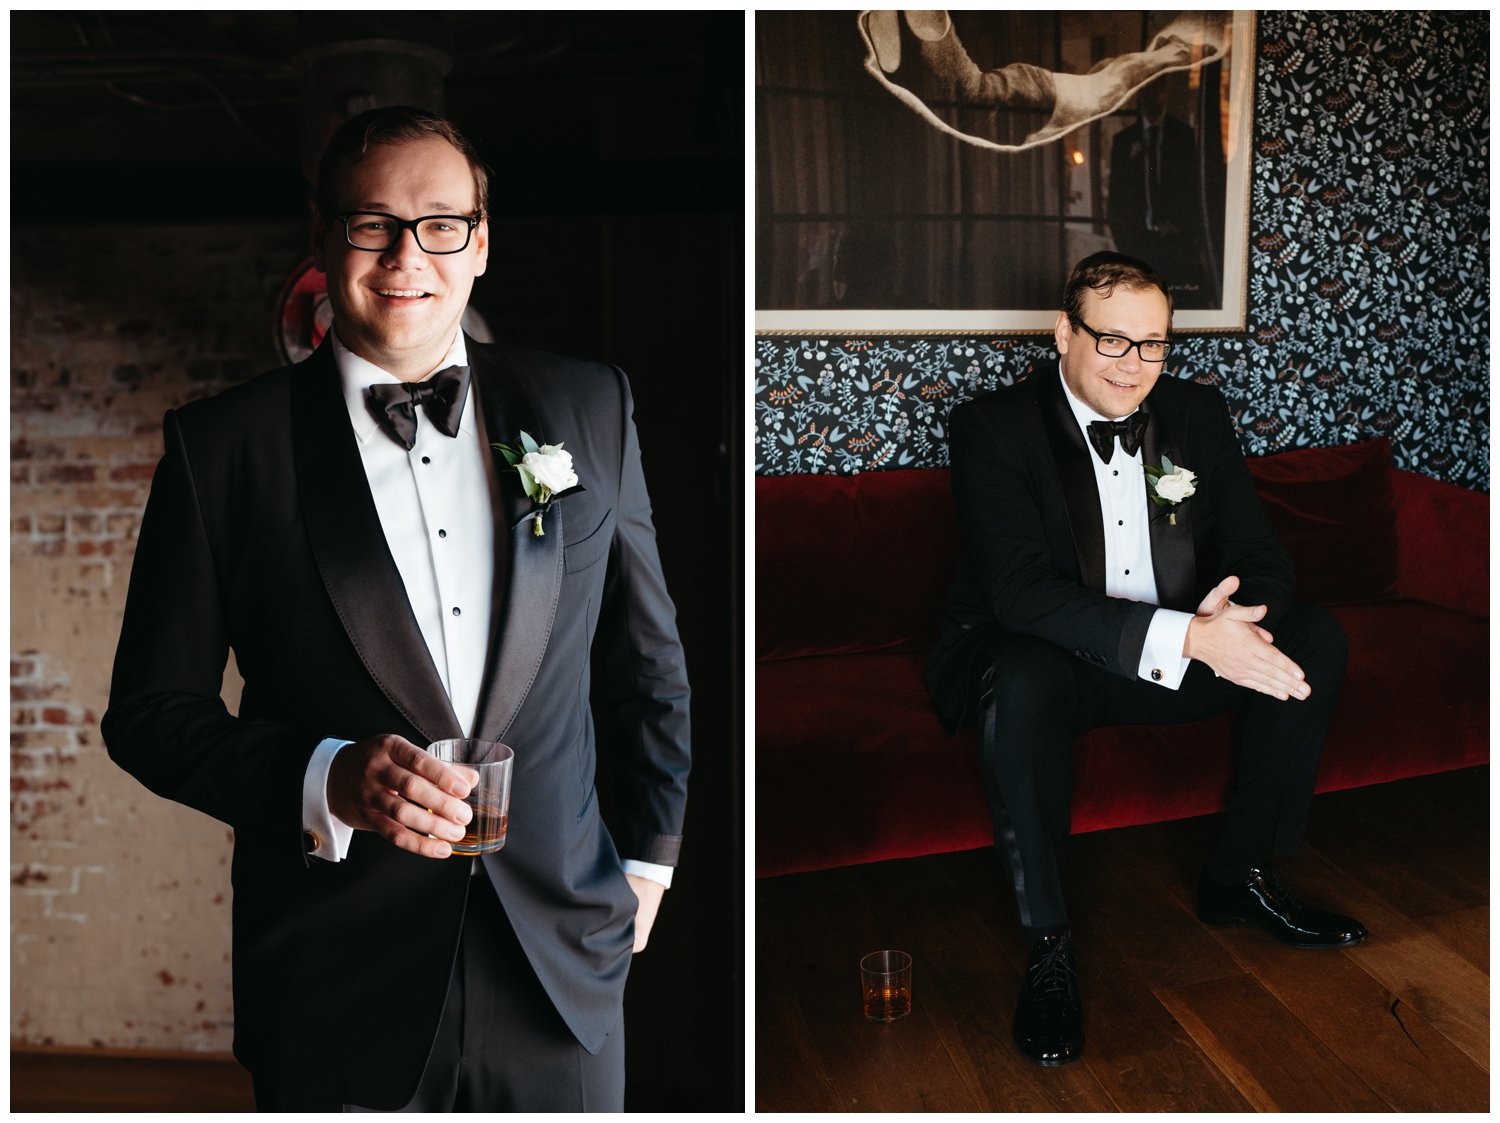 Portraits of the groom inside at his Ponce City Market wedding